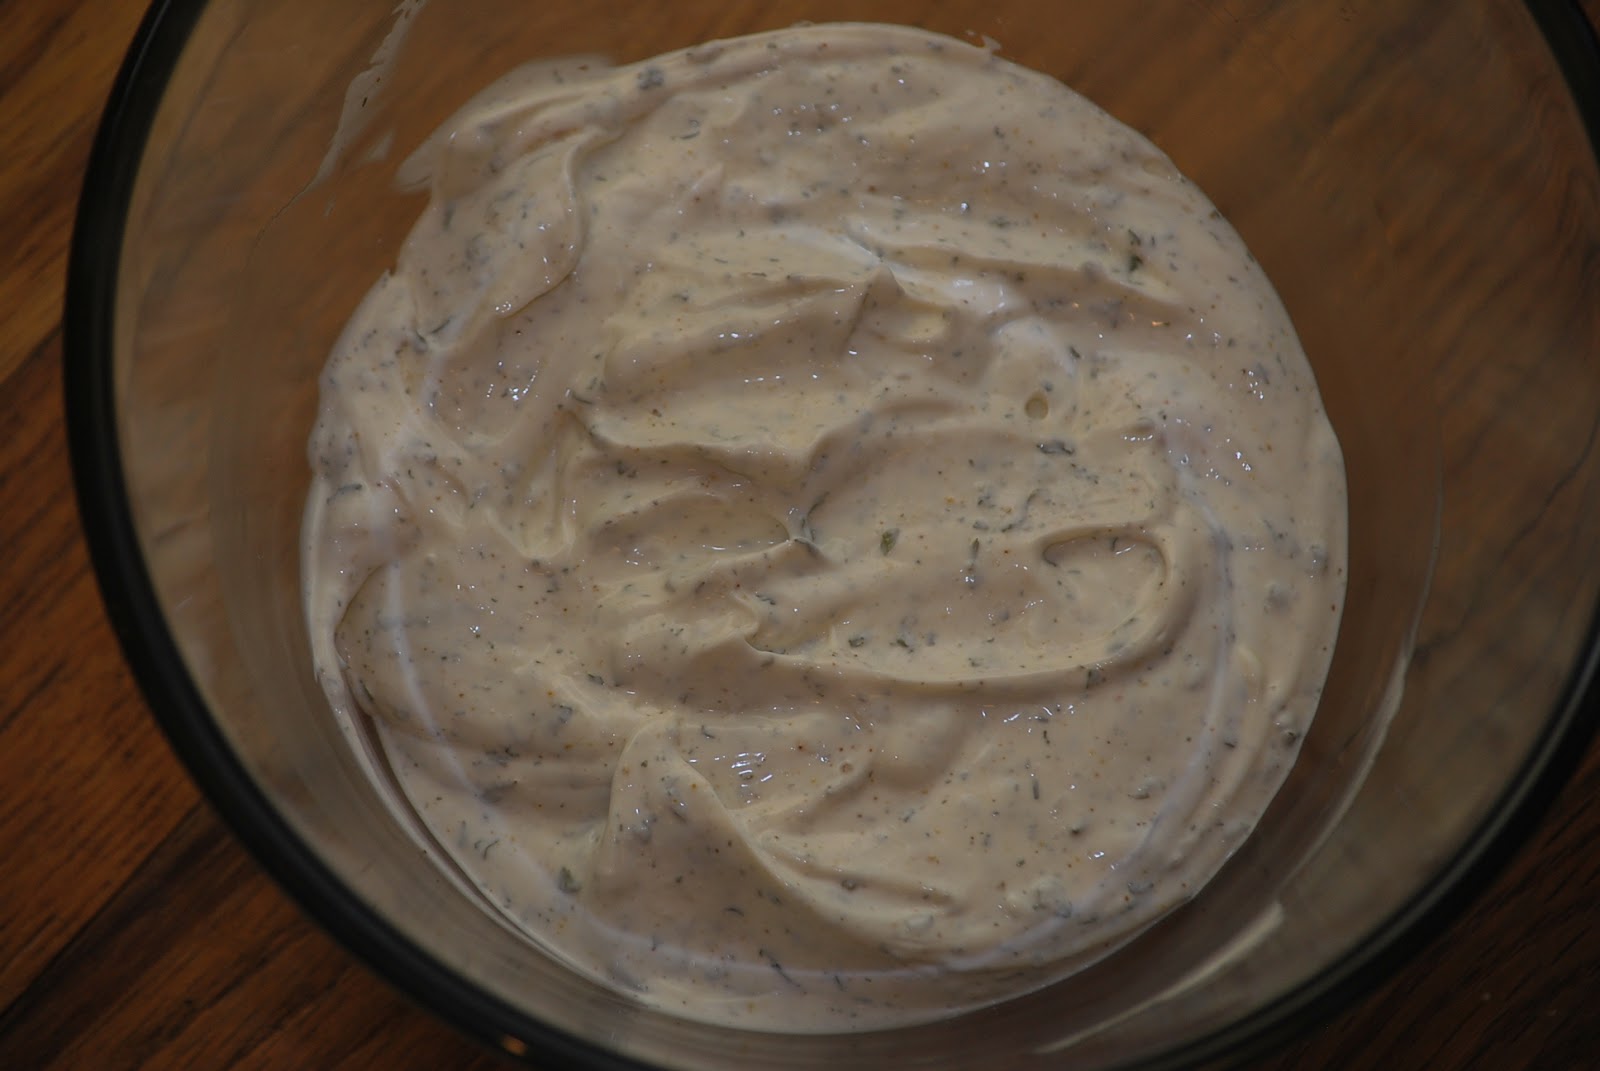 My story in recipes: Vegetable Dill Dip